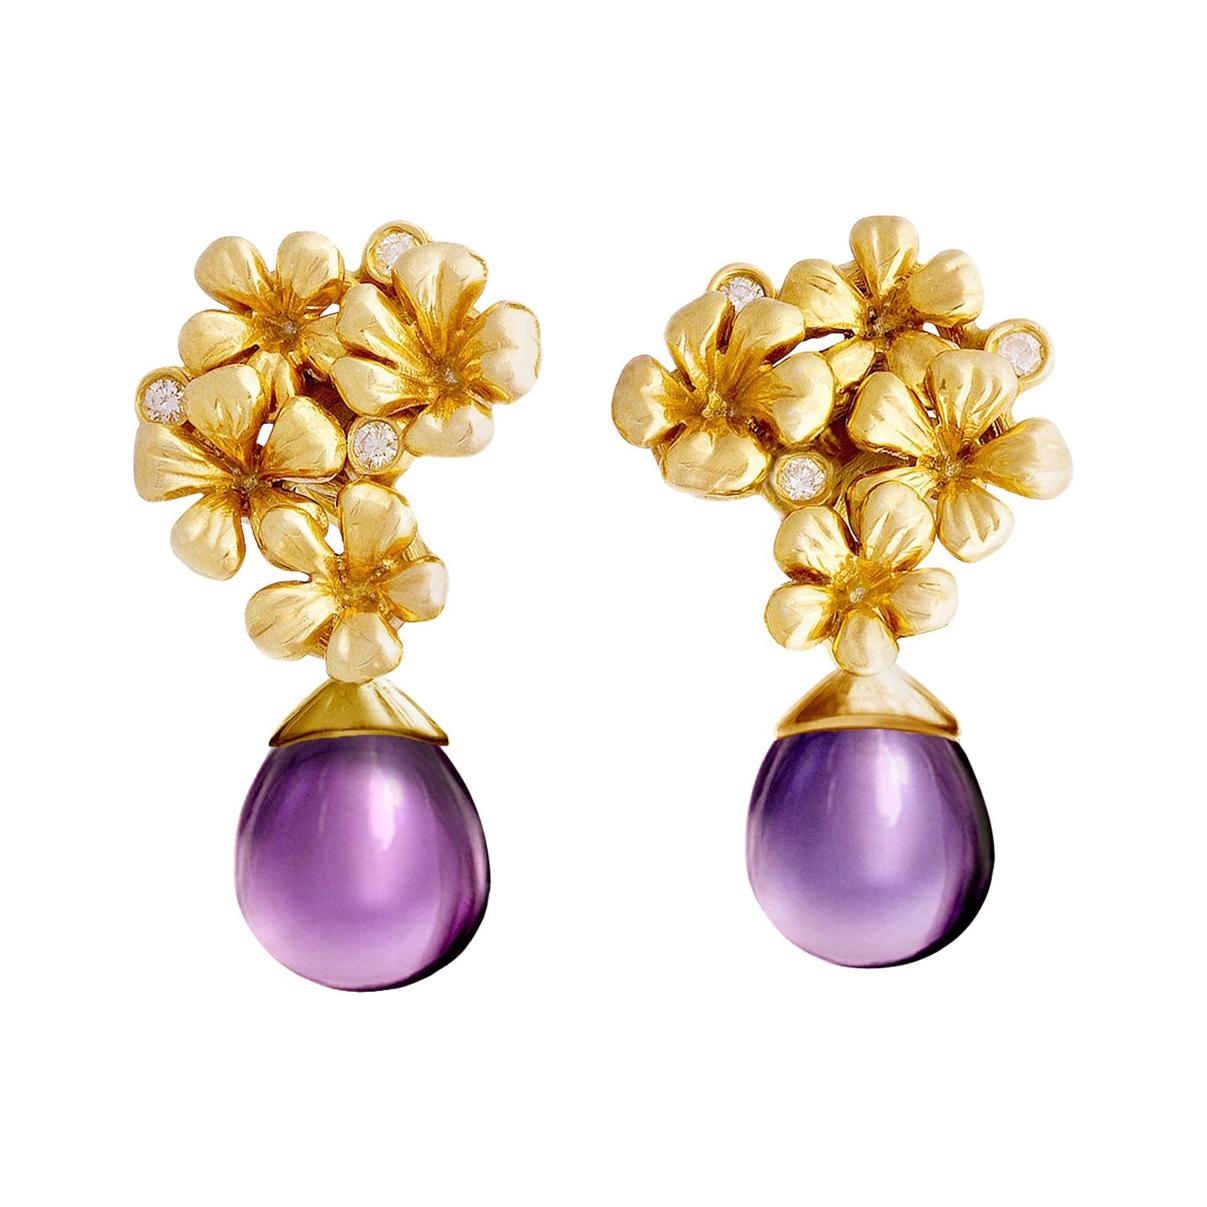 14 Karat Gold Plum Flowers Contemporary Earrings with Diamonds and Amethyst